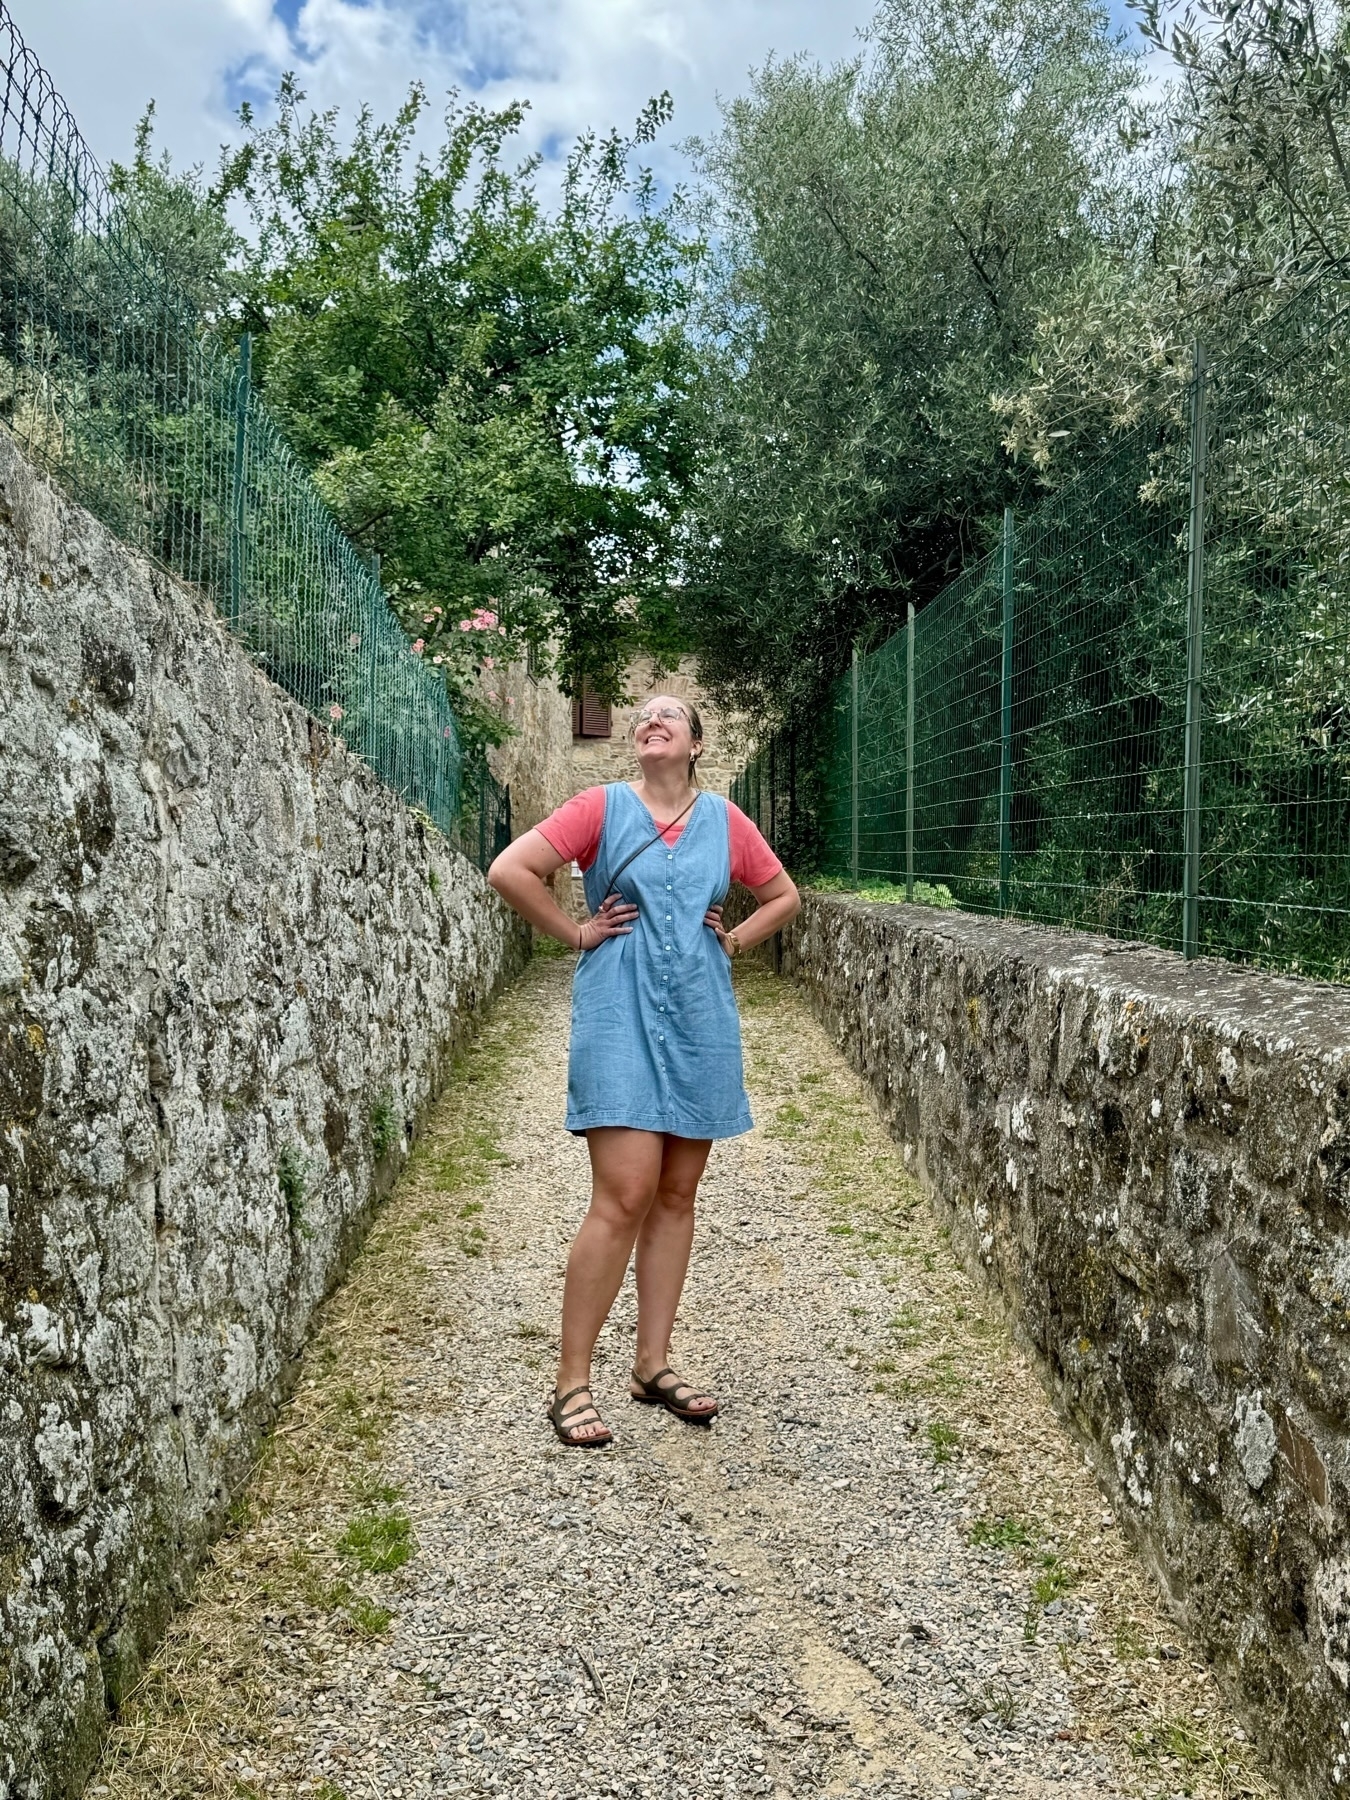 A person stands in a narrow alleyway lined with stone walls and metal fences, looking upwards and smiling. They are wearing a denim dress over a red shirt and sandals. The alley is surrounded by greenery and trees, and a partly cloudy sky is visible. 